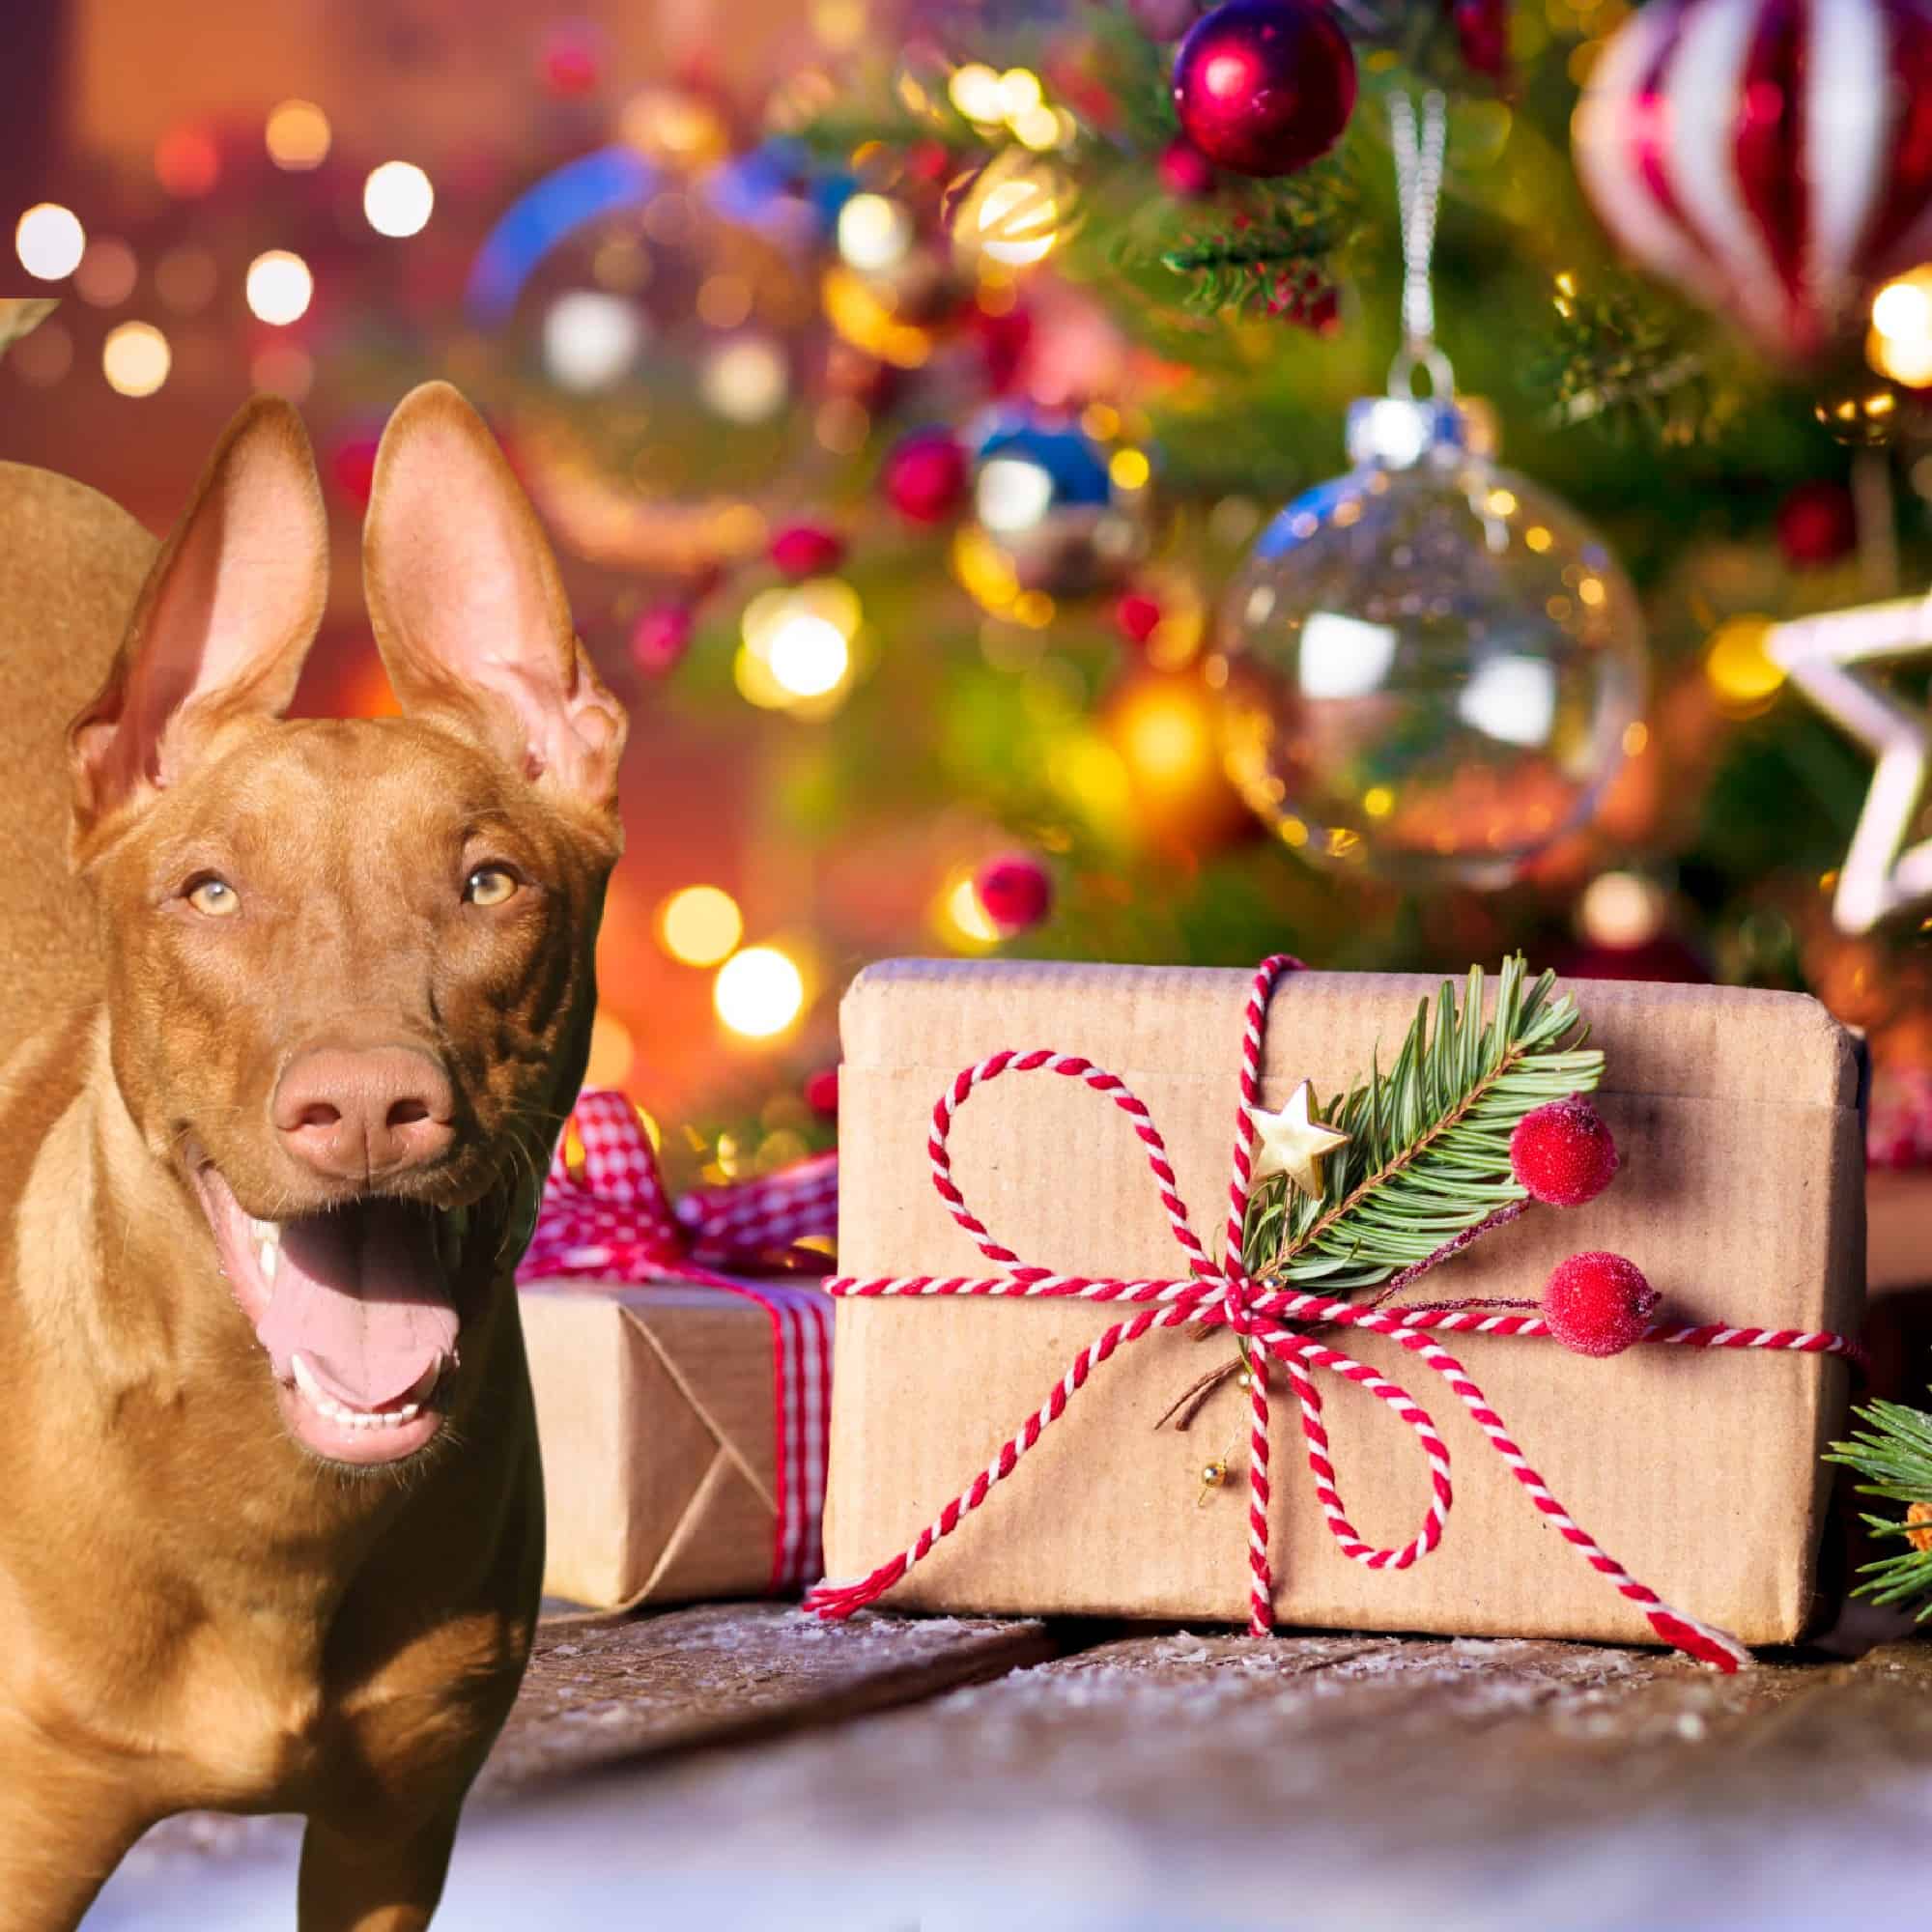 Need a little joy this Christmas eve? Just for fun, I rounded up 25 of the cutest cats and dogs celebrating Christmas. Check them out!